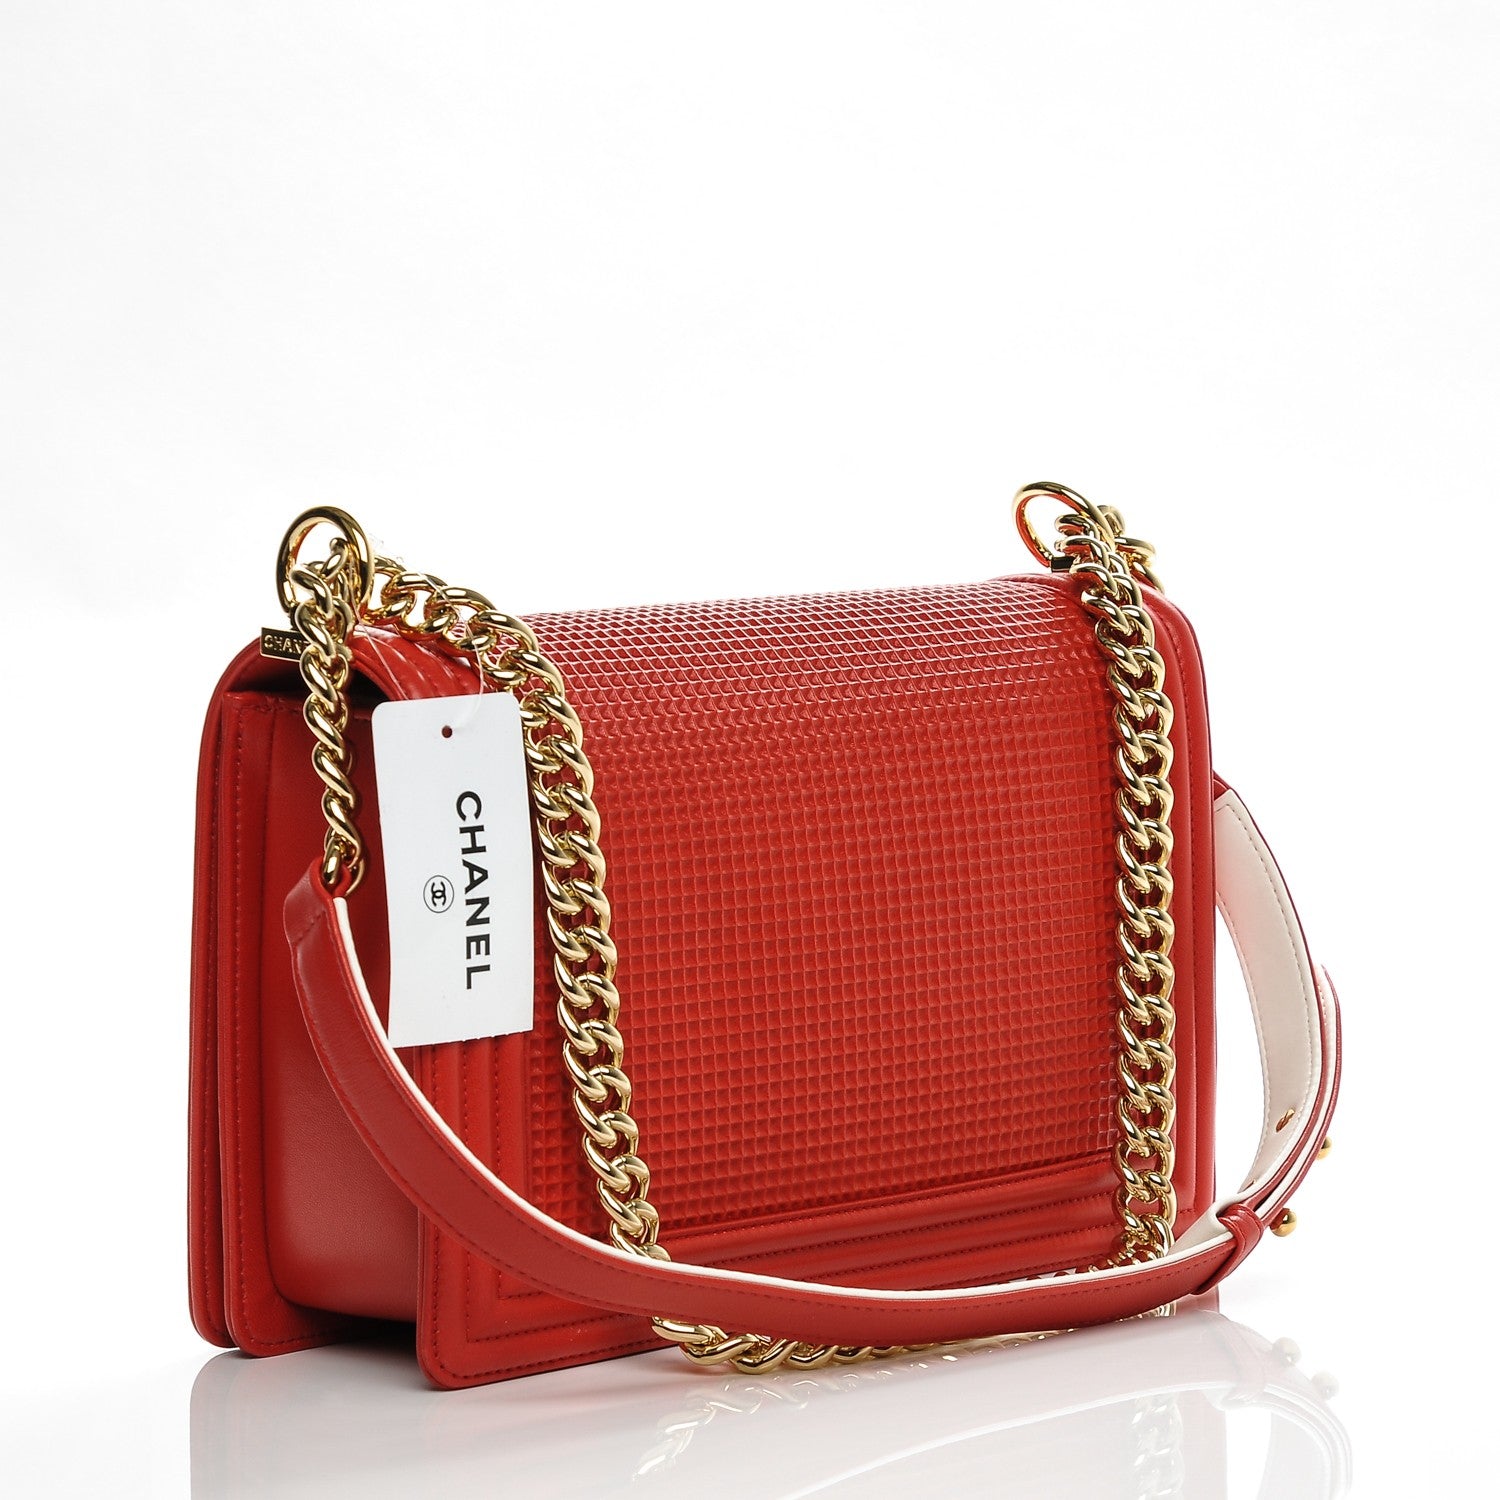 CHANEL FLAP BOY RED CUBE EMBOSSED LEATHER MEDIUM BAG